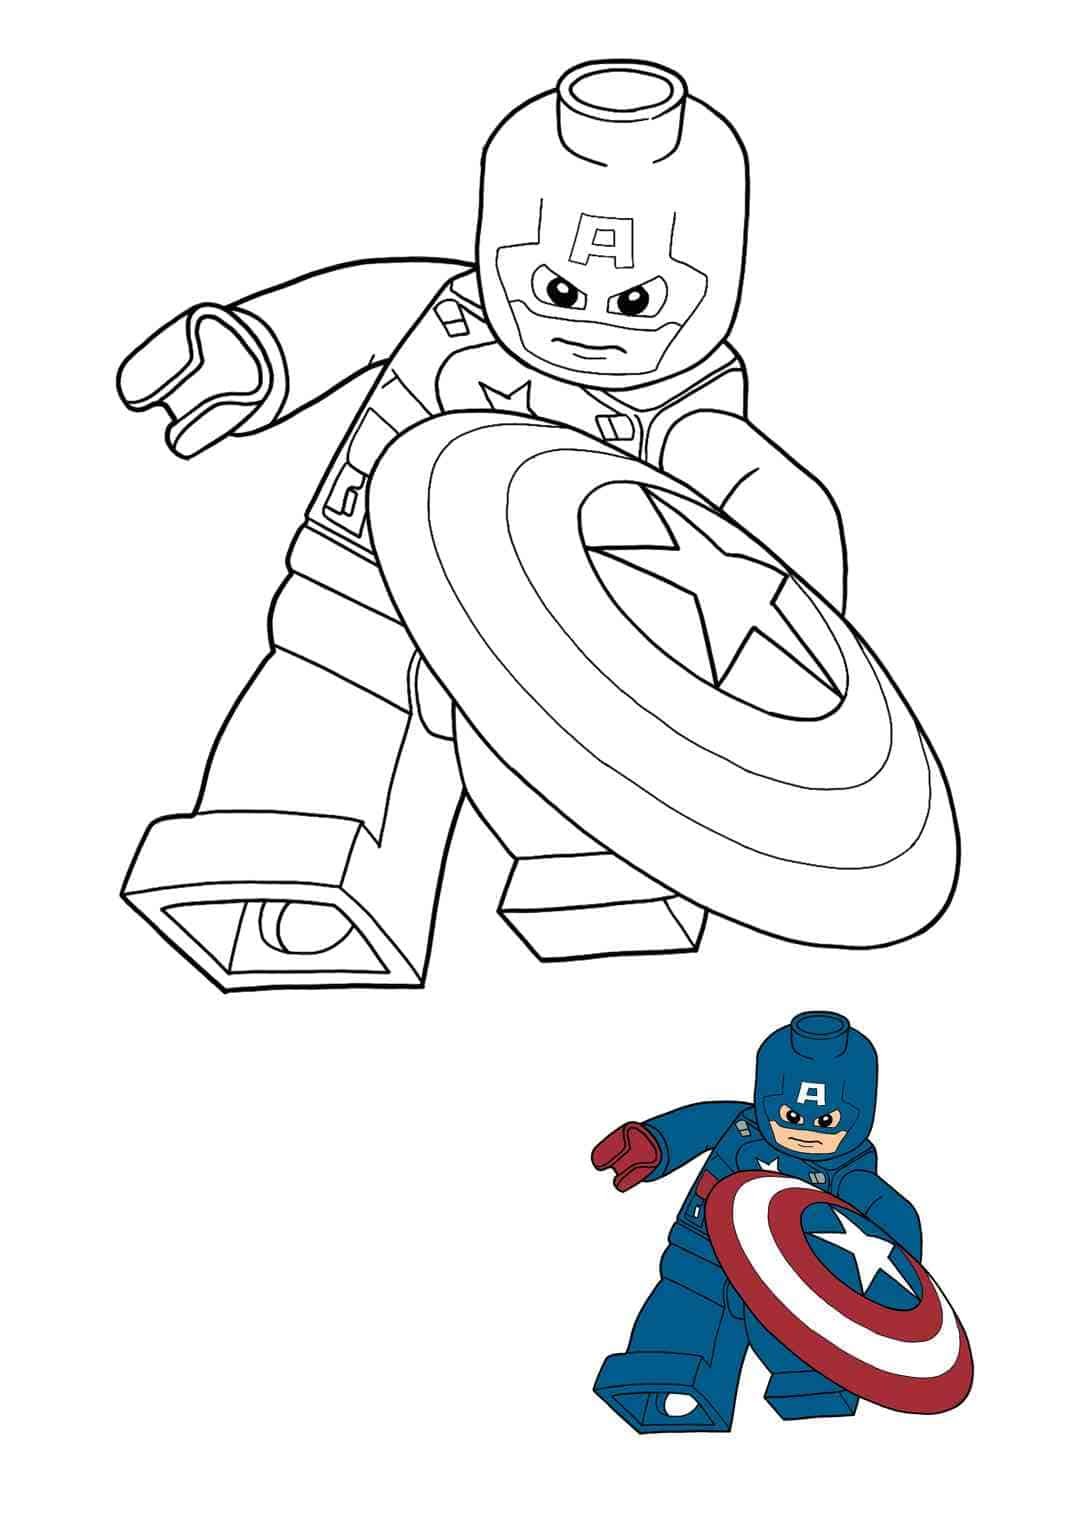 Captain America Lego free printable coloring page with a sample